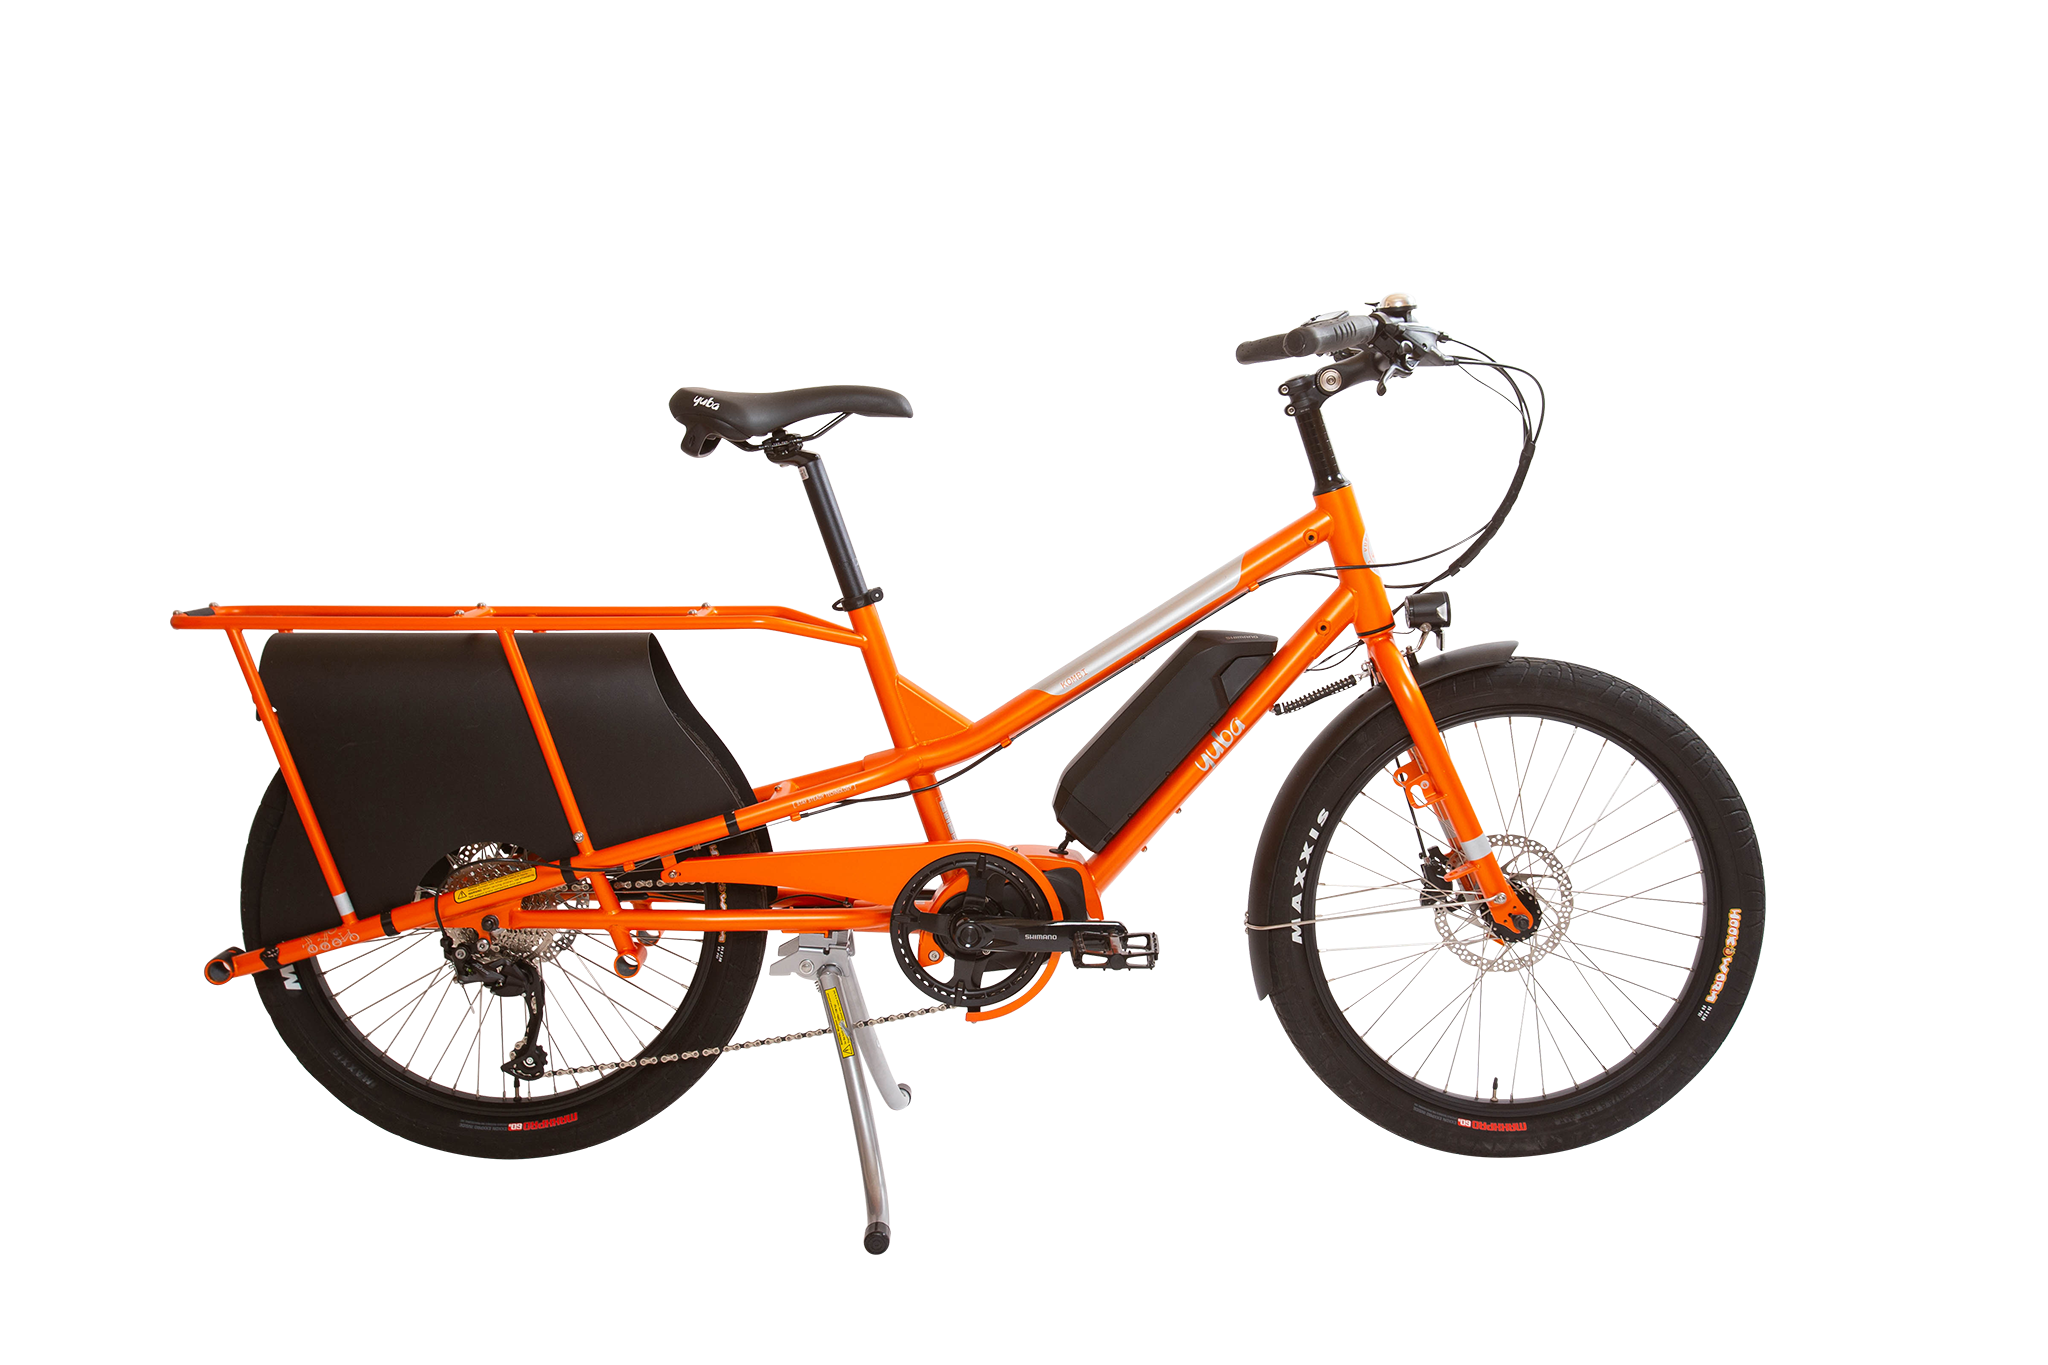 A product image of the Yuba Kombi E5 electric longtail cargo bike which can be hired from LeaseBike. The photo shows the right side of the cargo bike in its bare configuration without any accessories attached. 